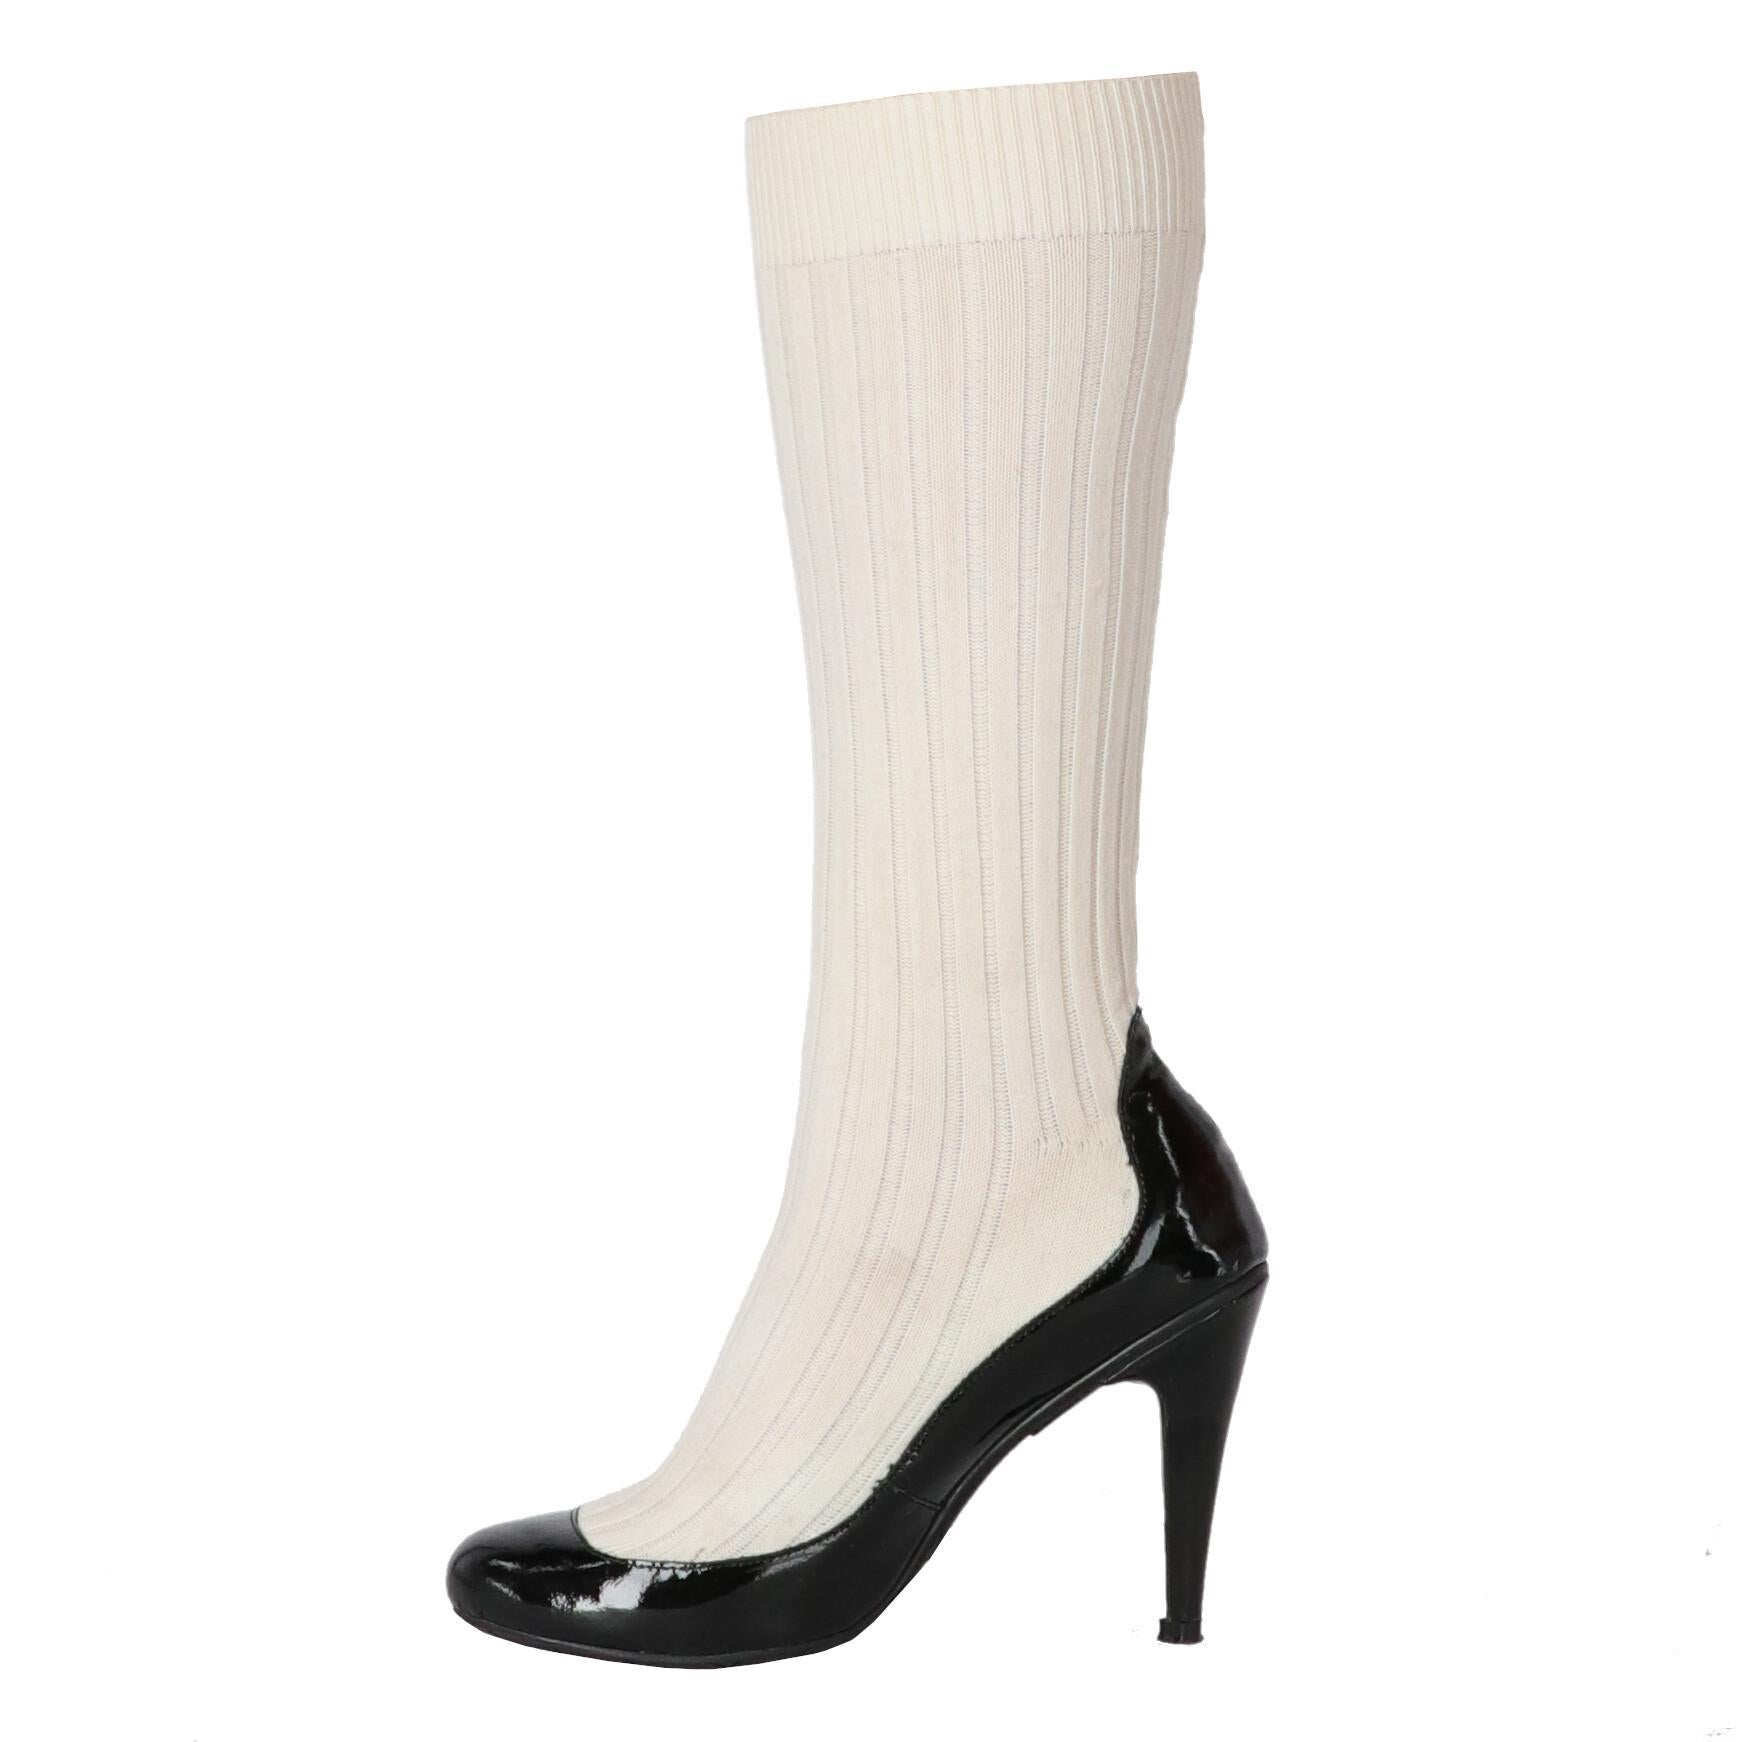 Chanel mid-calf length patent sock boots, featuring black patent leather pumps and merged knit ribbed white socks. Round toe, high heel and little CC signature glued on the back of the shoe.
They shows very little signs of wear on the sole, as shown